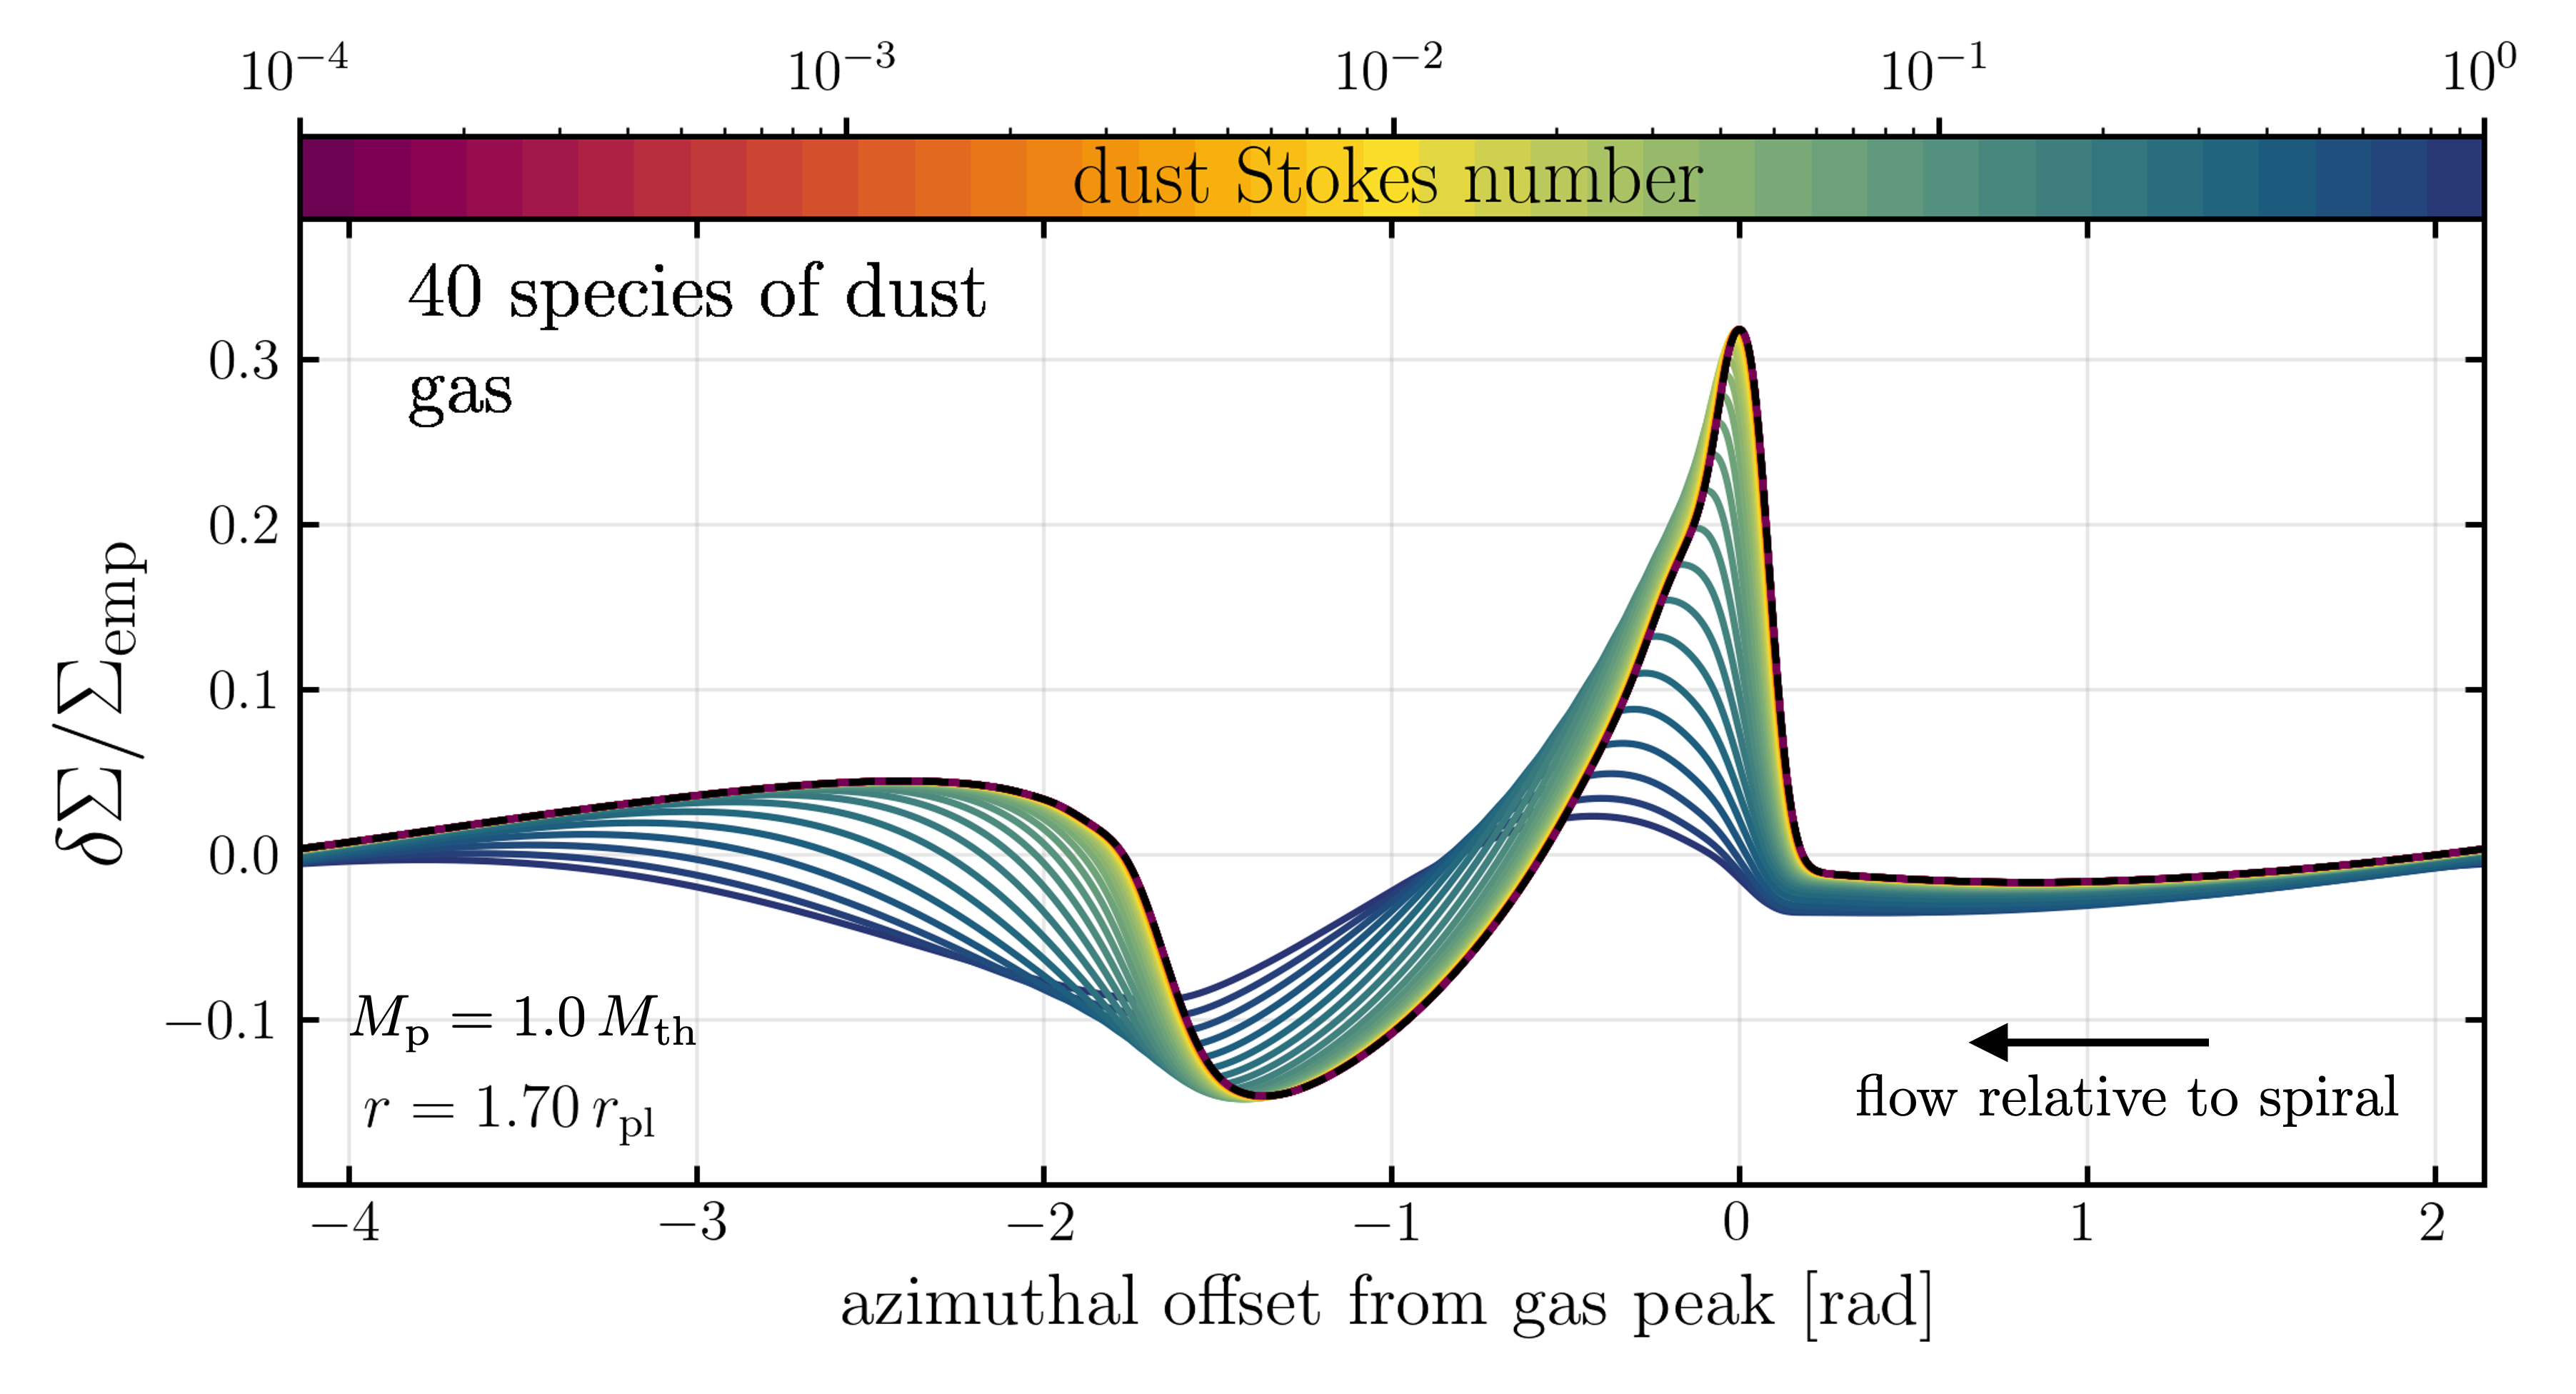 Azimuthal profiles of dust spirals over 4 orders of magnitude in Stokes number